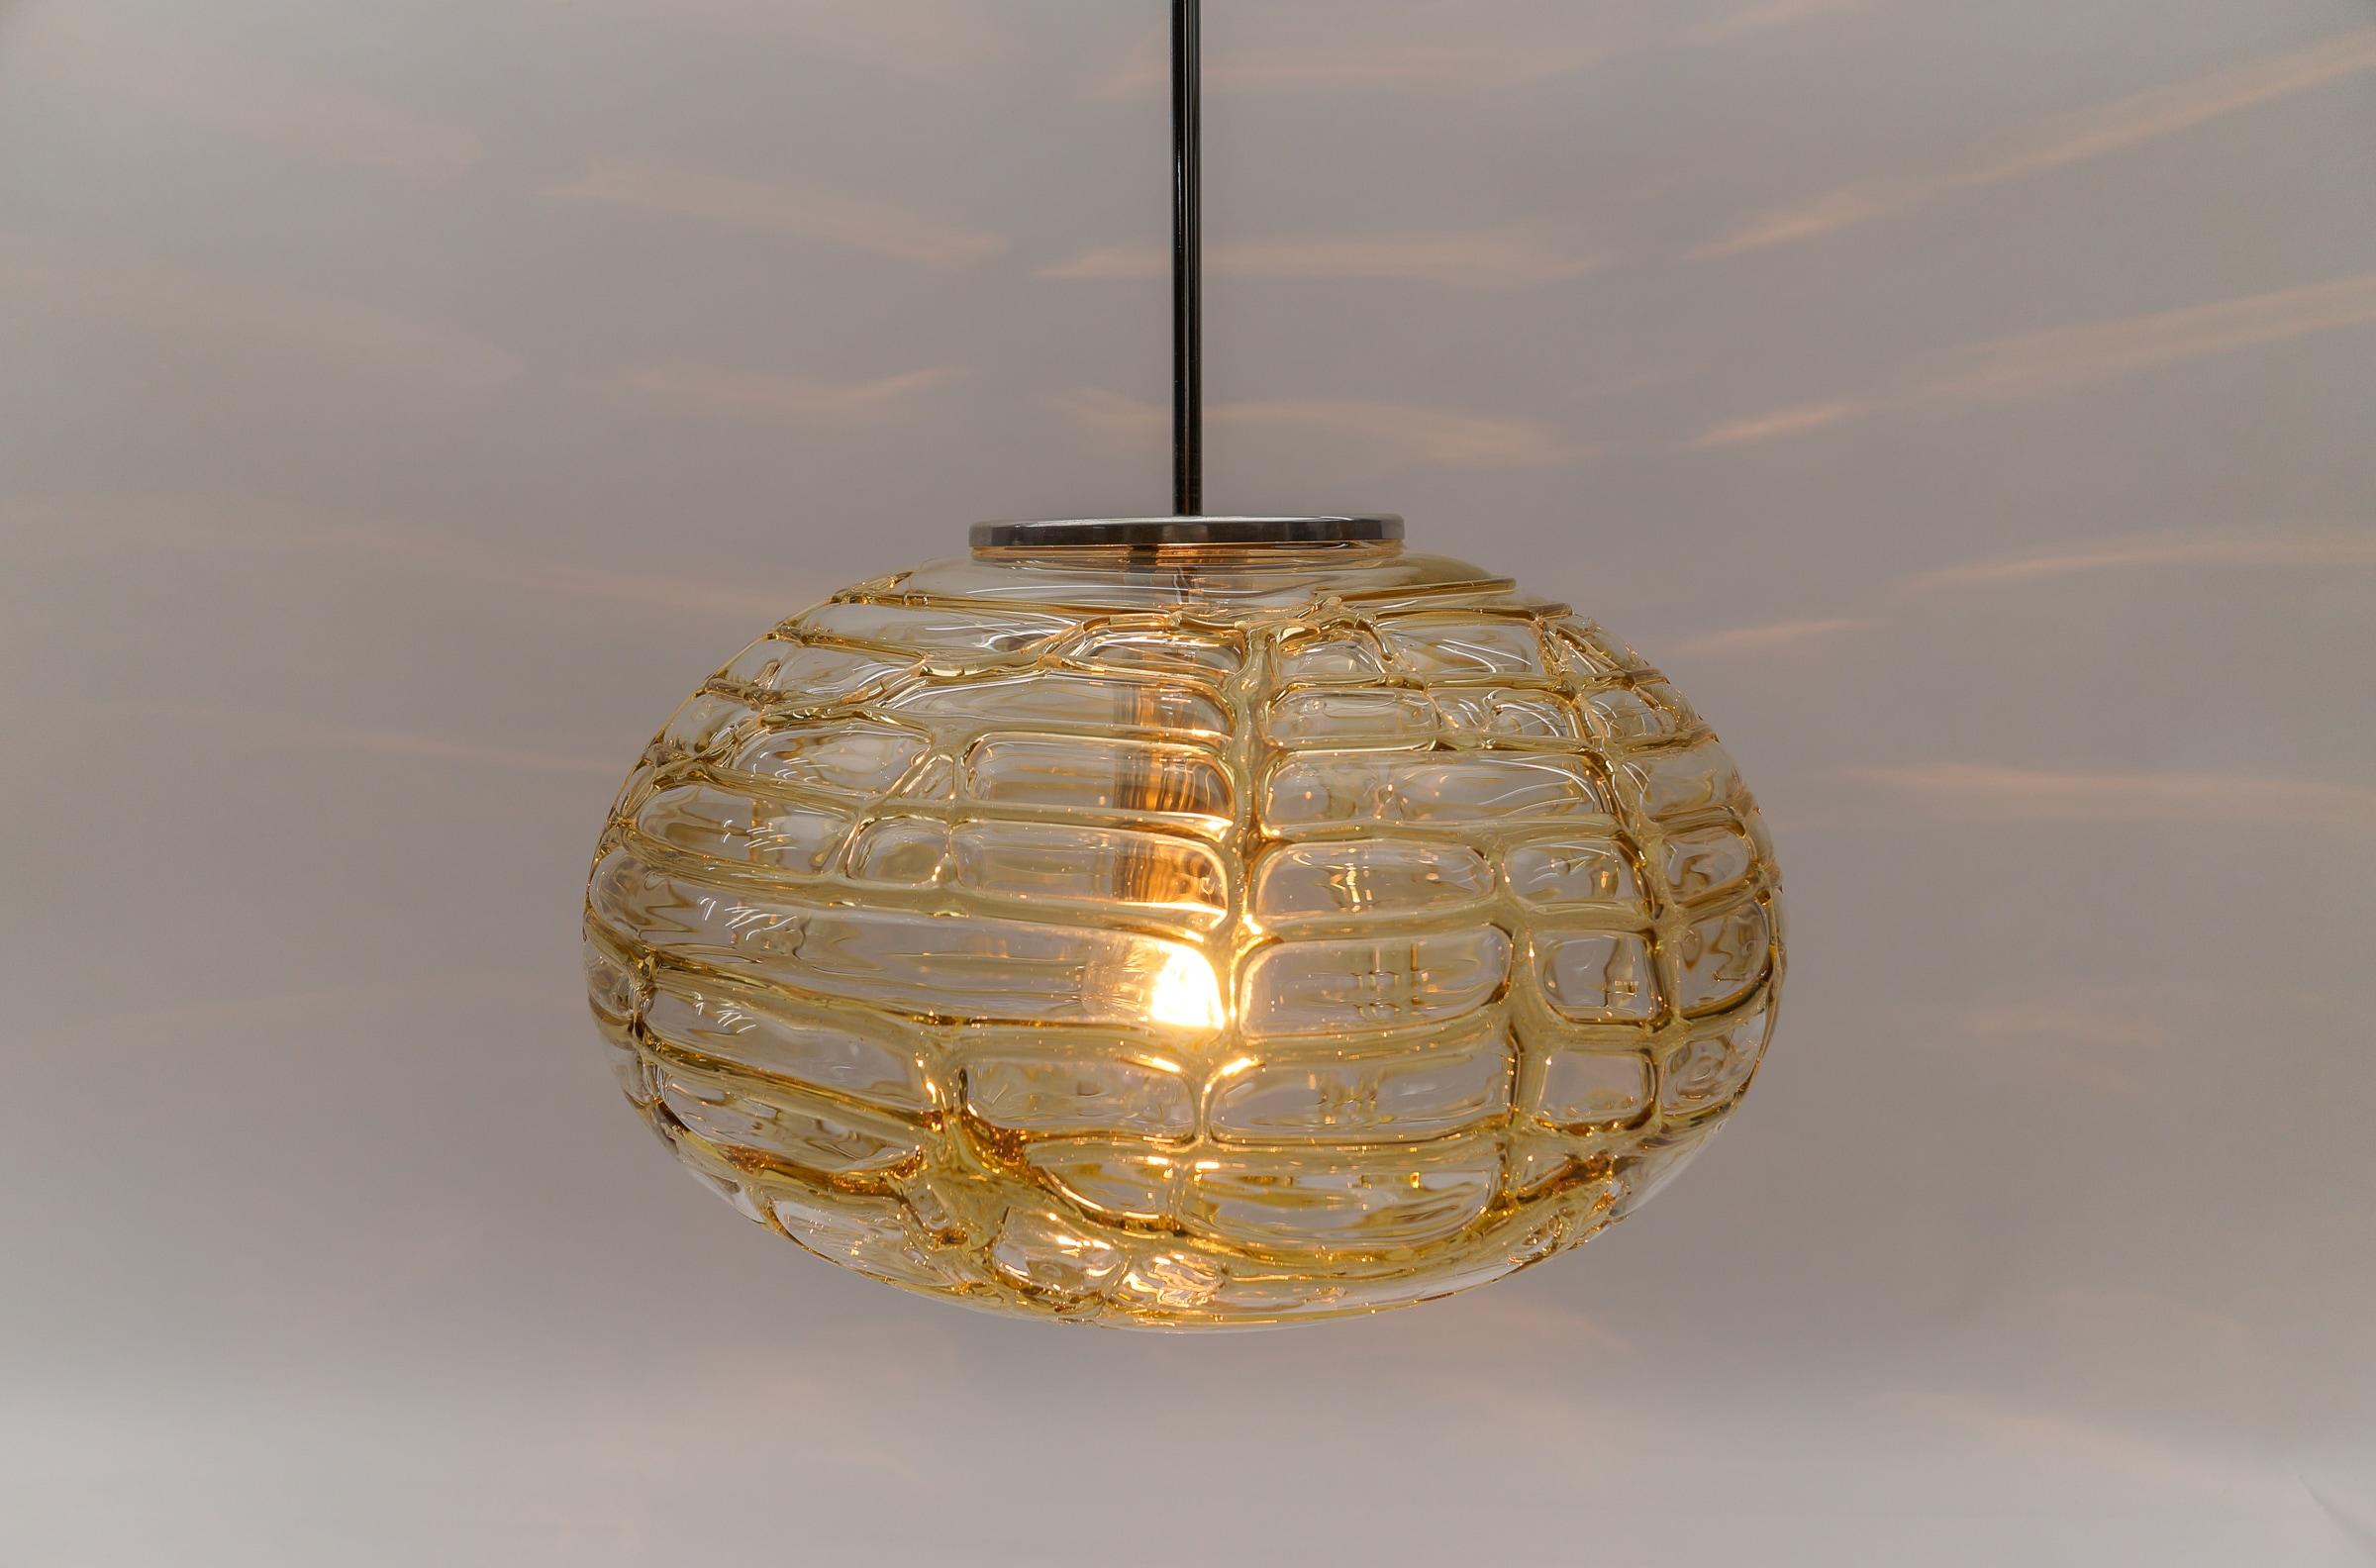 Yellow Oval Murano Glass Ball Pendant Lamp by Doria, 1960s Germany   For Sale 1